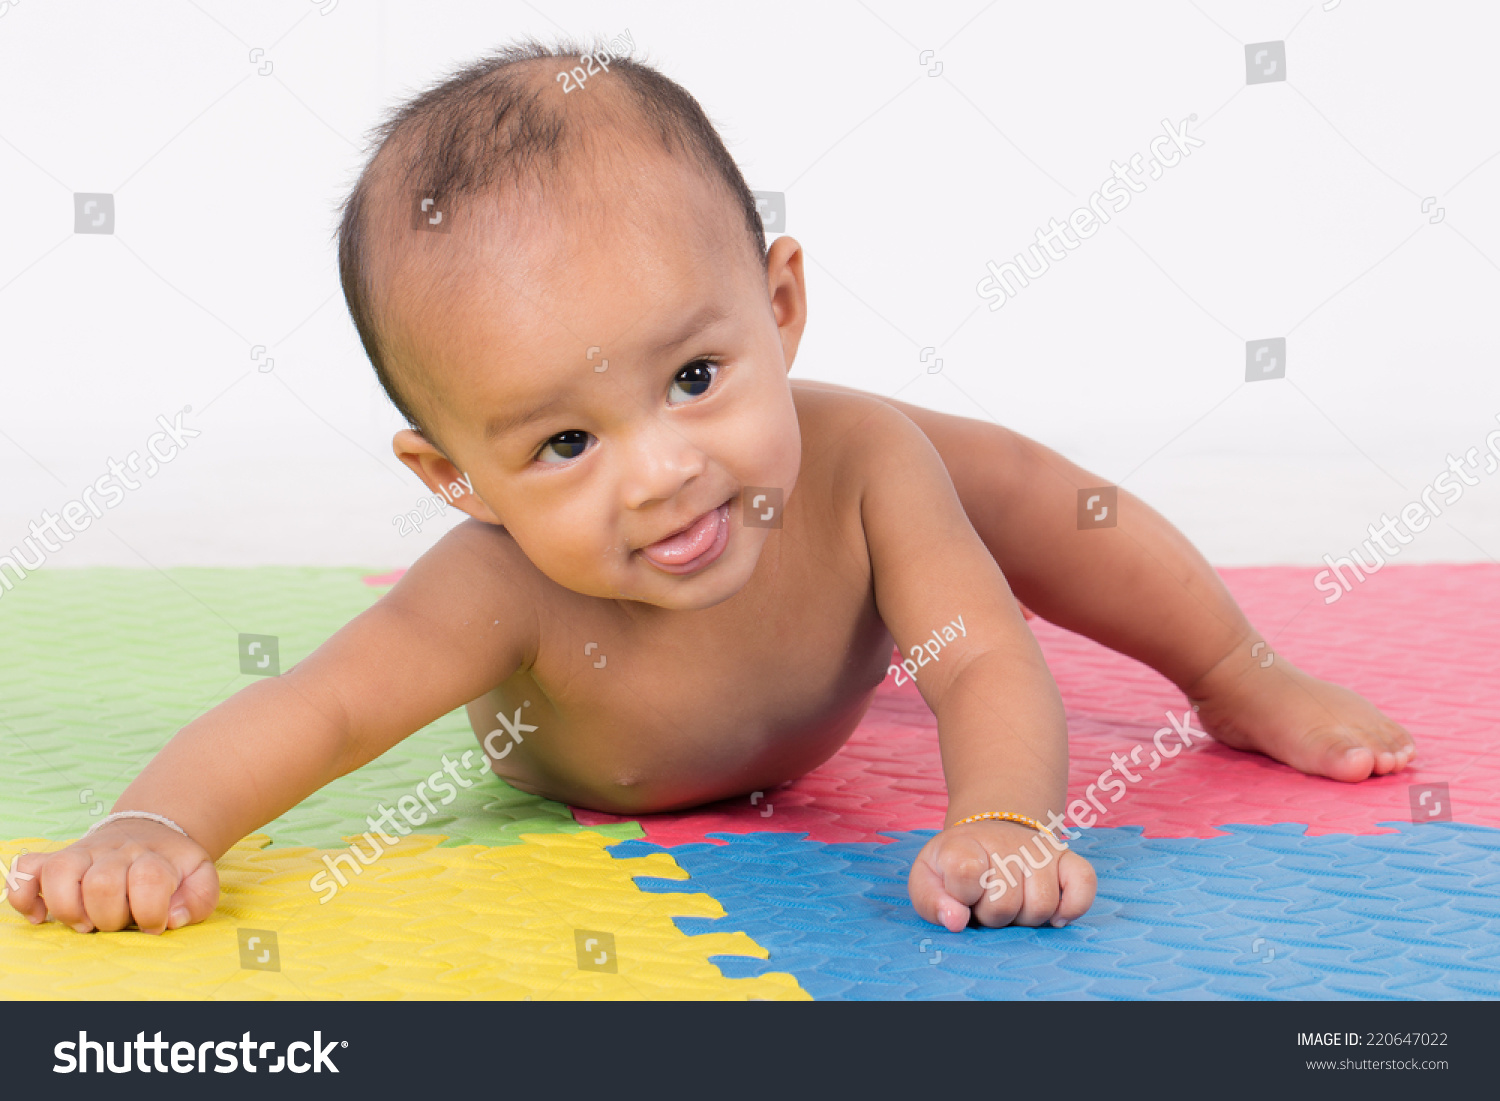 Happy cute 5 month old Asian baby boy with short black hair on rubber floor #220647022